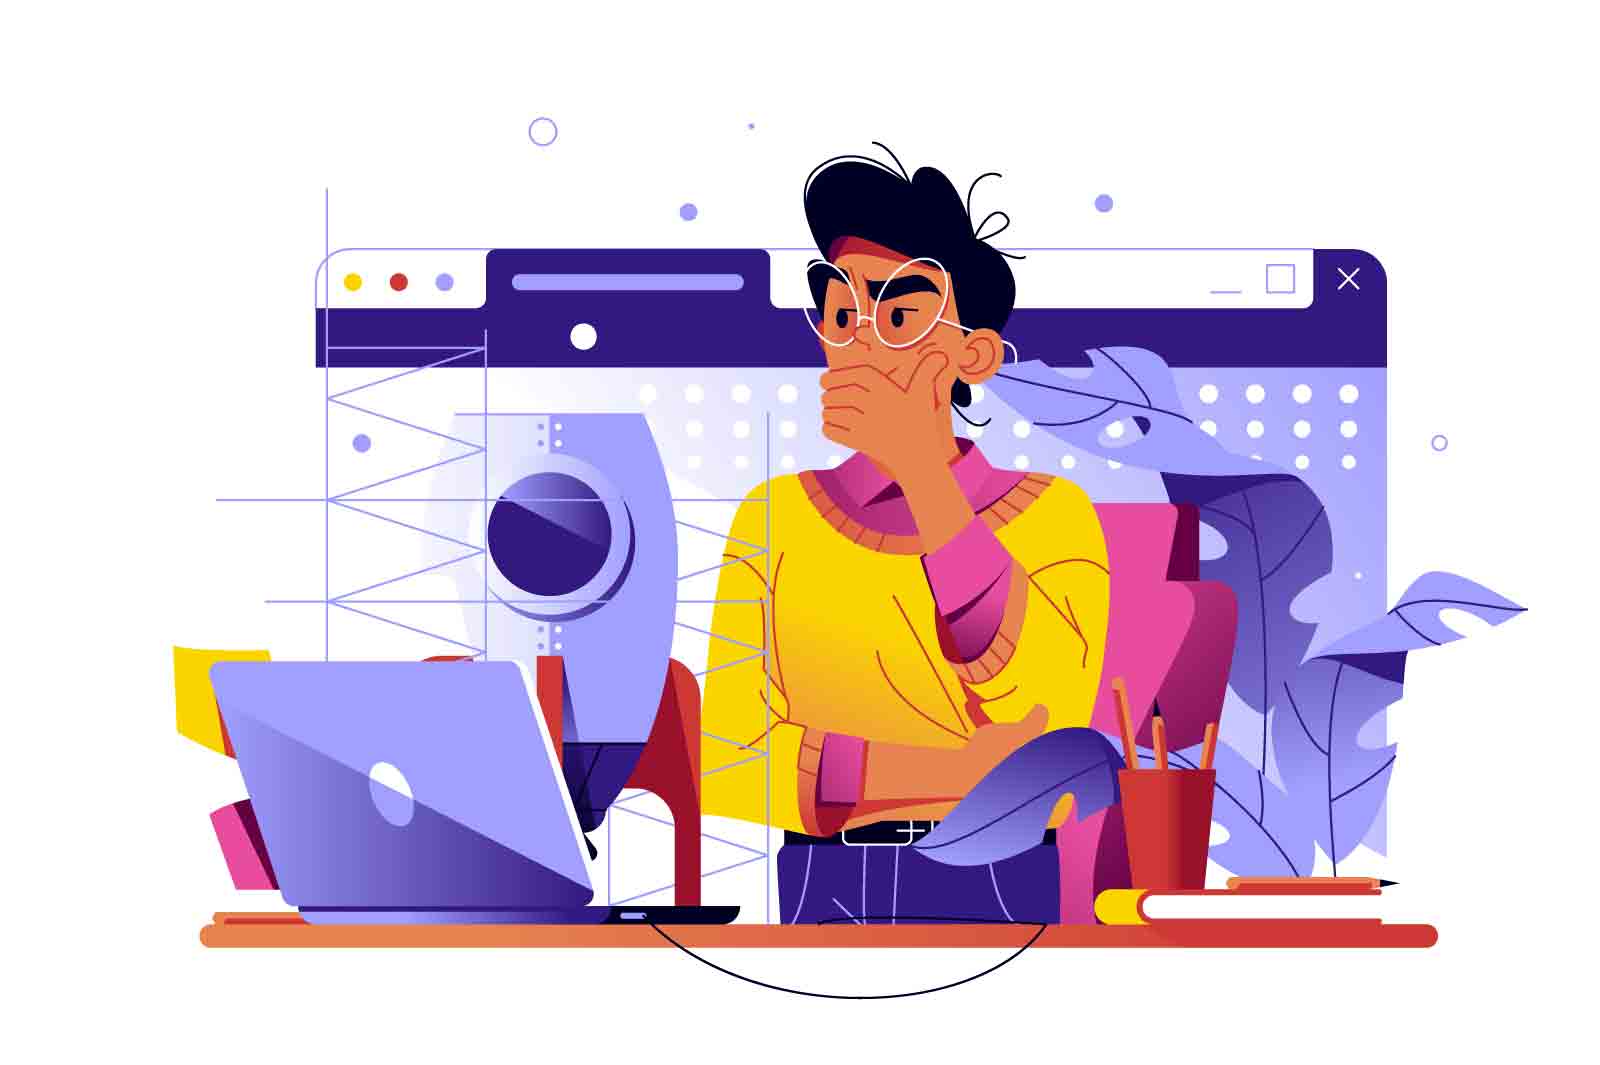 Man working on laptop in office vector illustration. Freelance worker at online remote work flat concept. Freelancer working at new project or startup